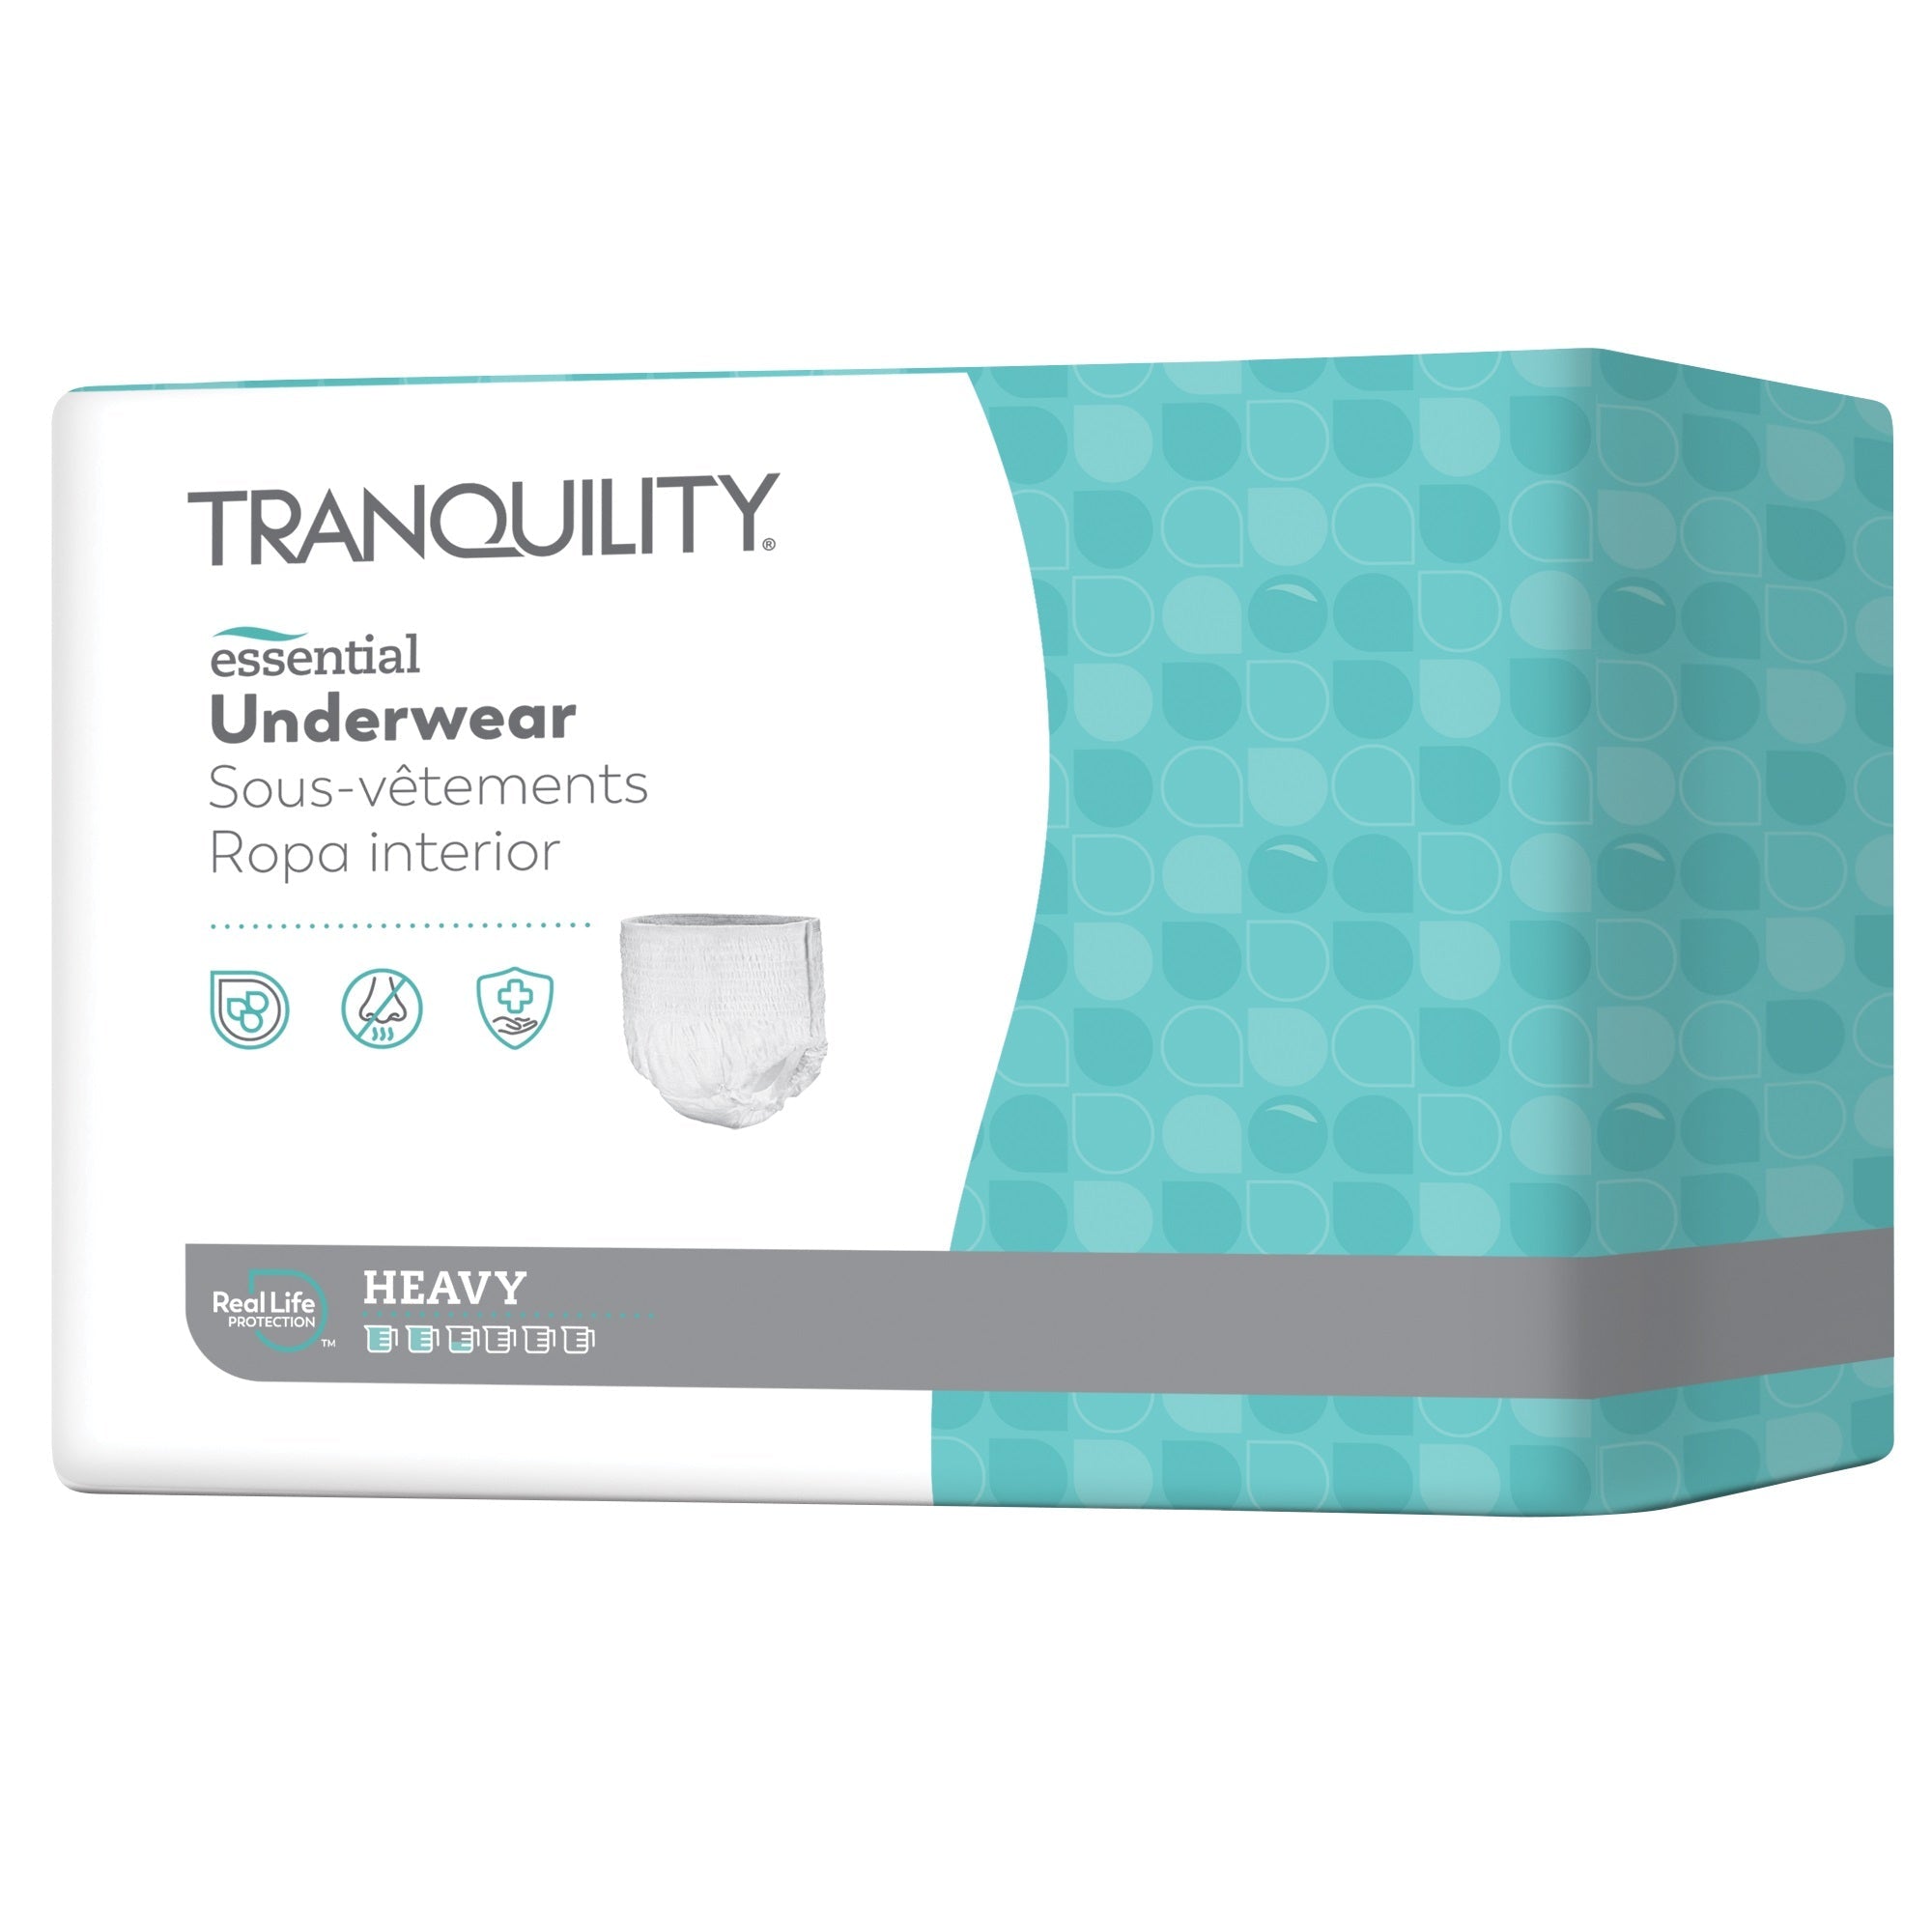 CA/80 - Tranquility® Select® Disposable Absorbent Underwear, 19 oz Fluid Capacity, Medium (34" to 48" Waist/Hip,120 to 175 lb) - Possible sub for PU2650 - Best Buy Medical Supplies